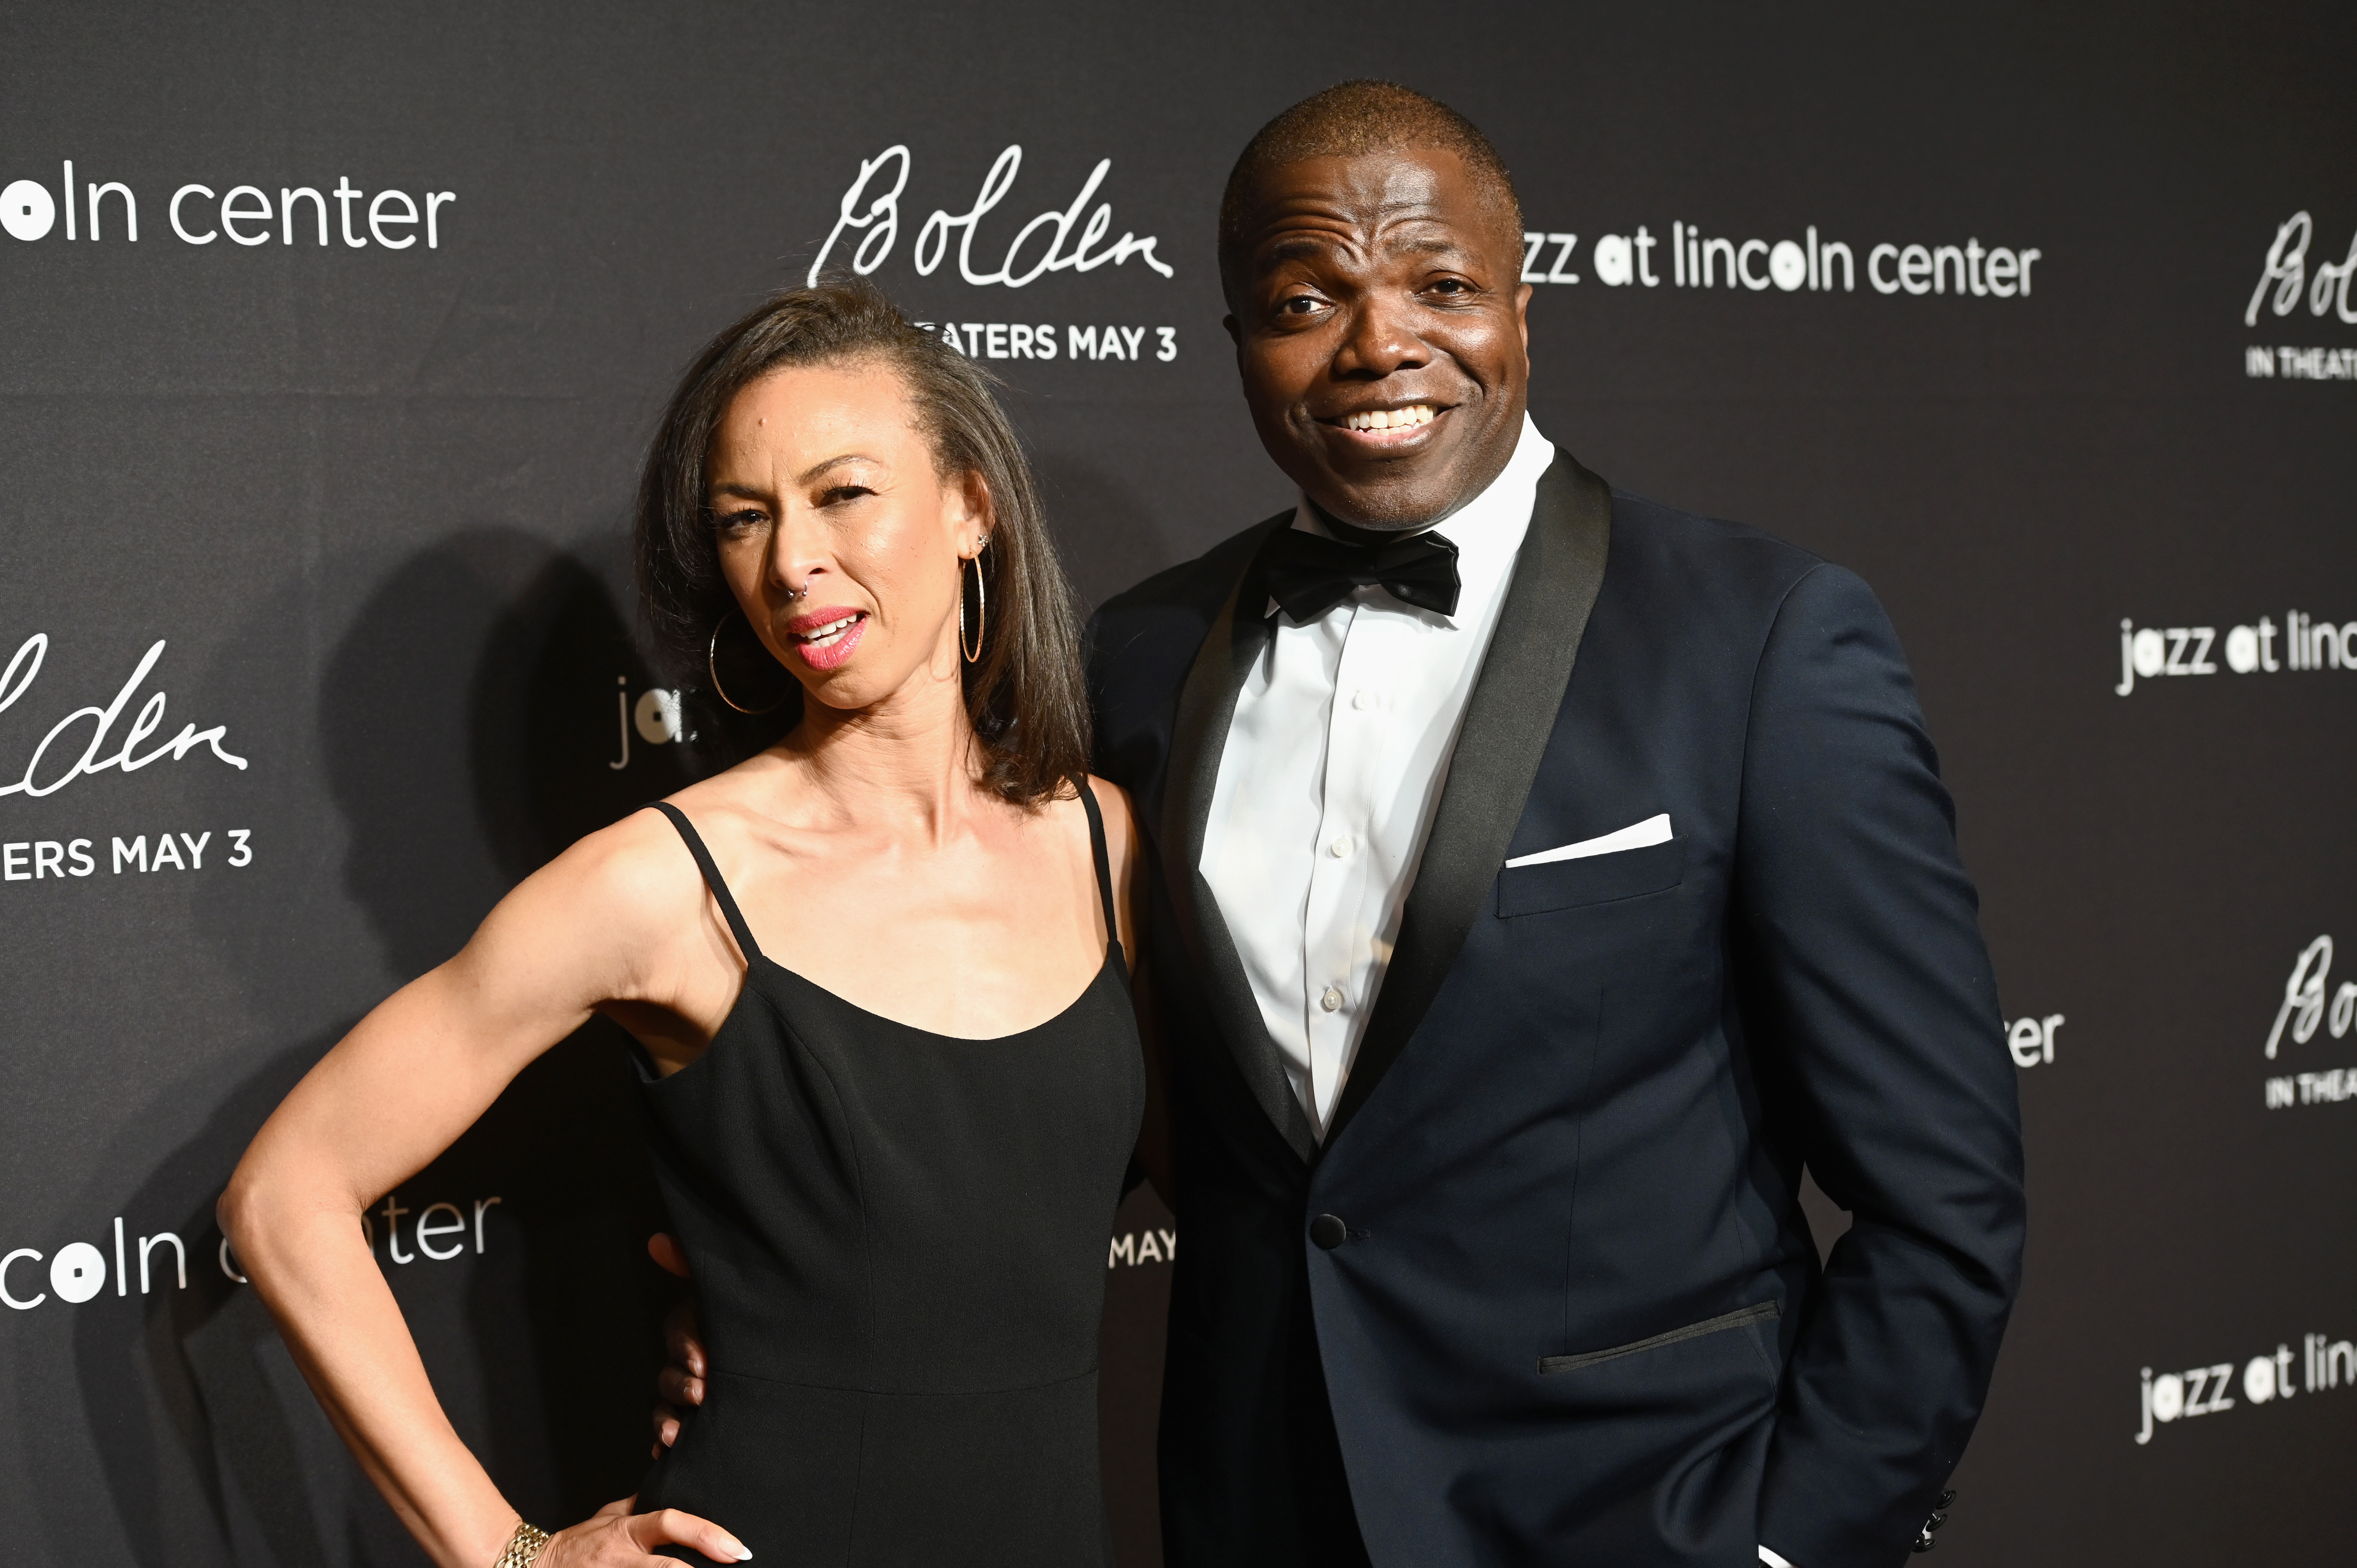 Coco Wilson and Reno Wilson at Lincoln Center on April 17, 2019 in New York City. | Source: Getty Images